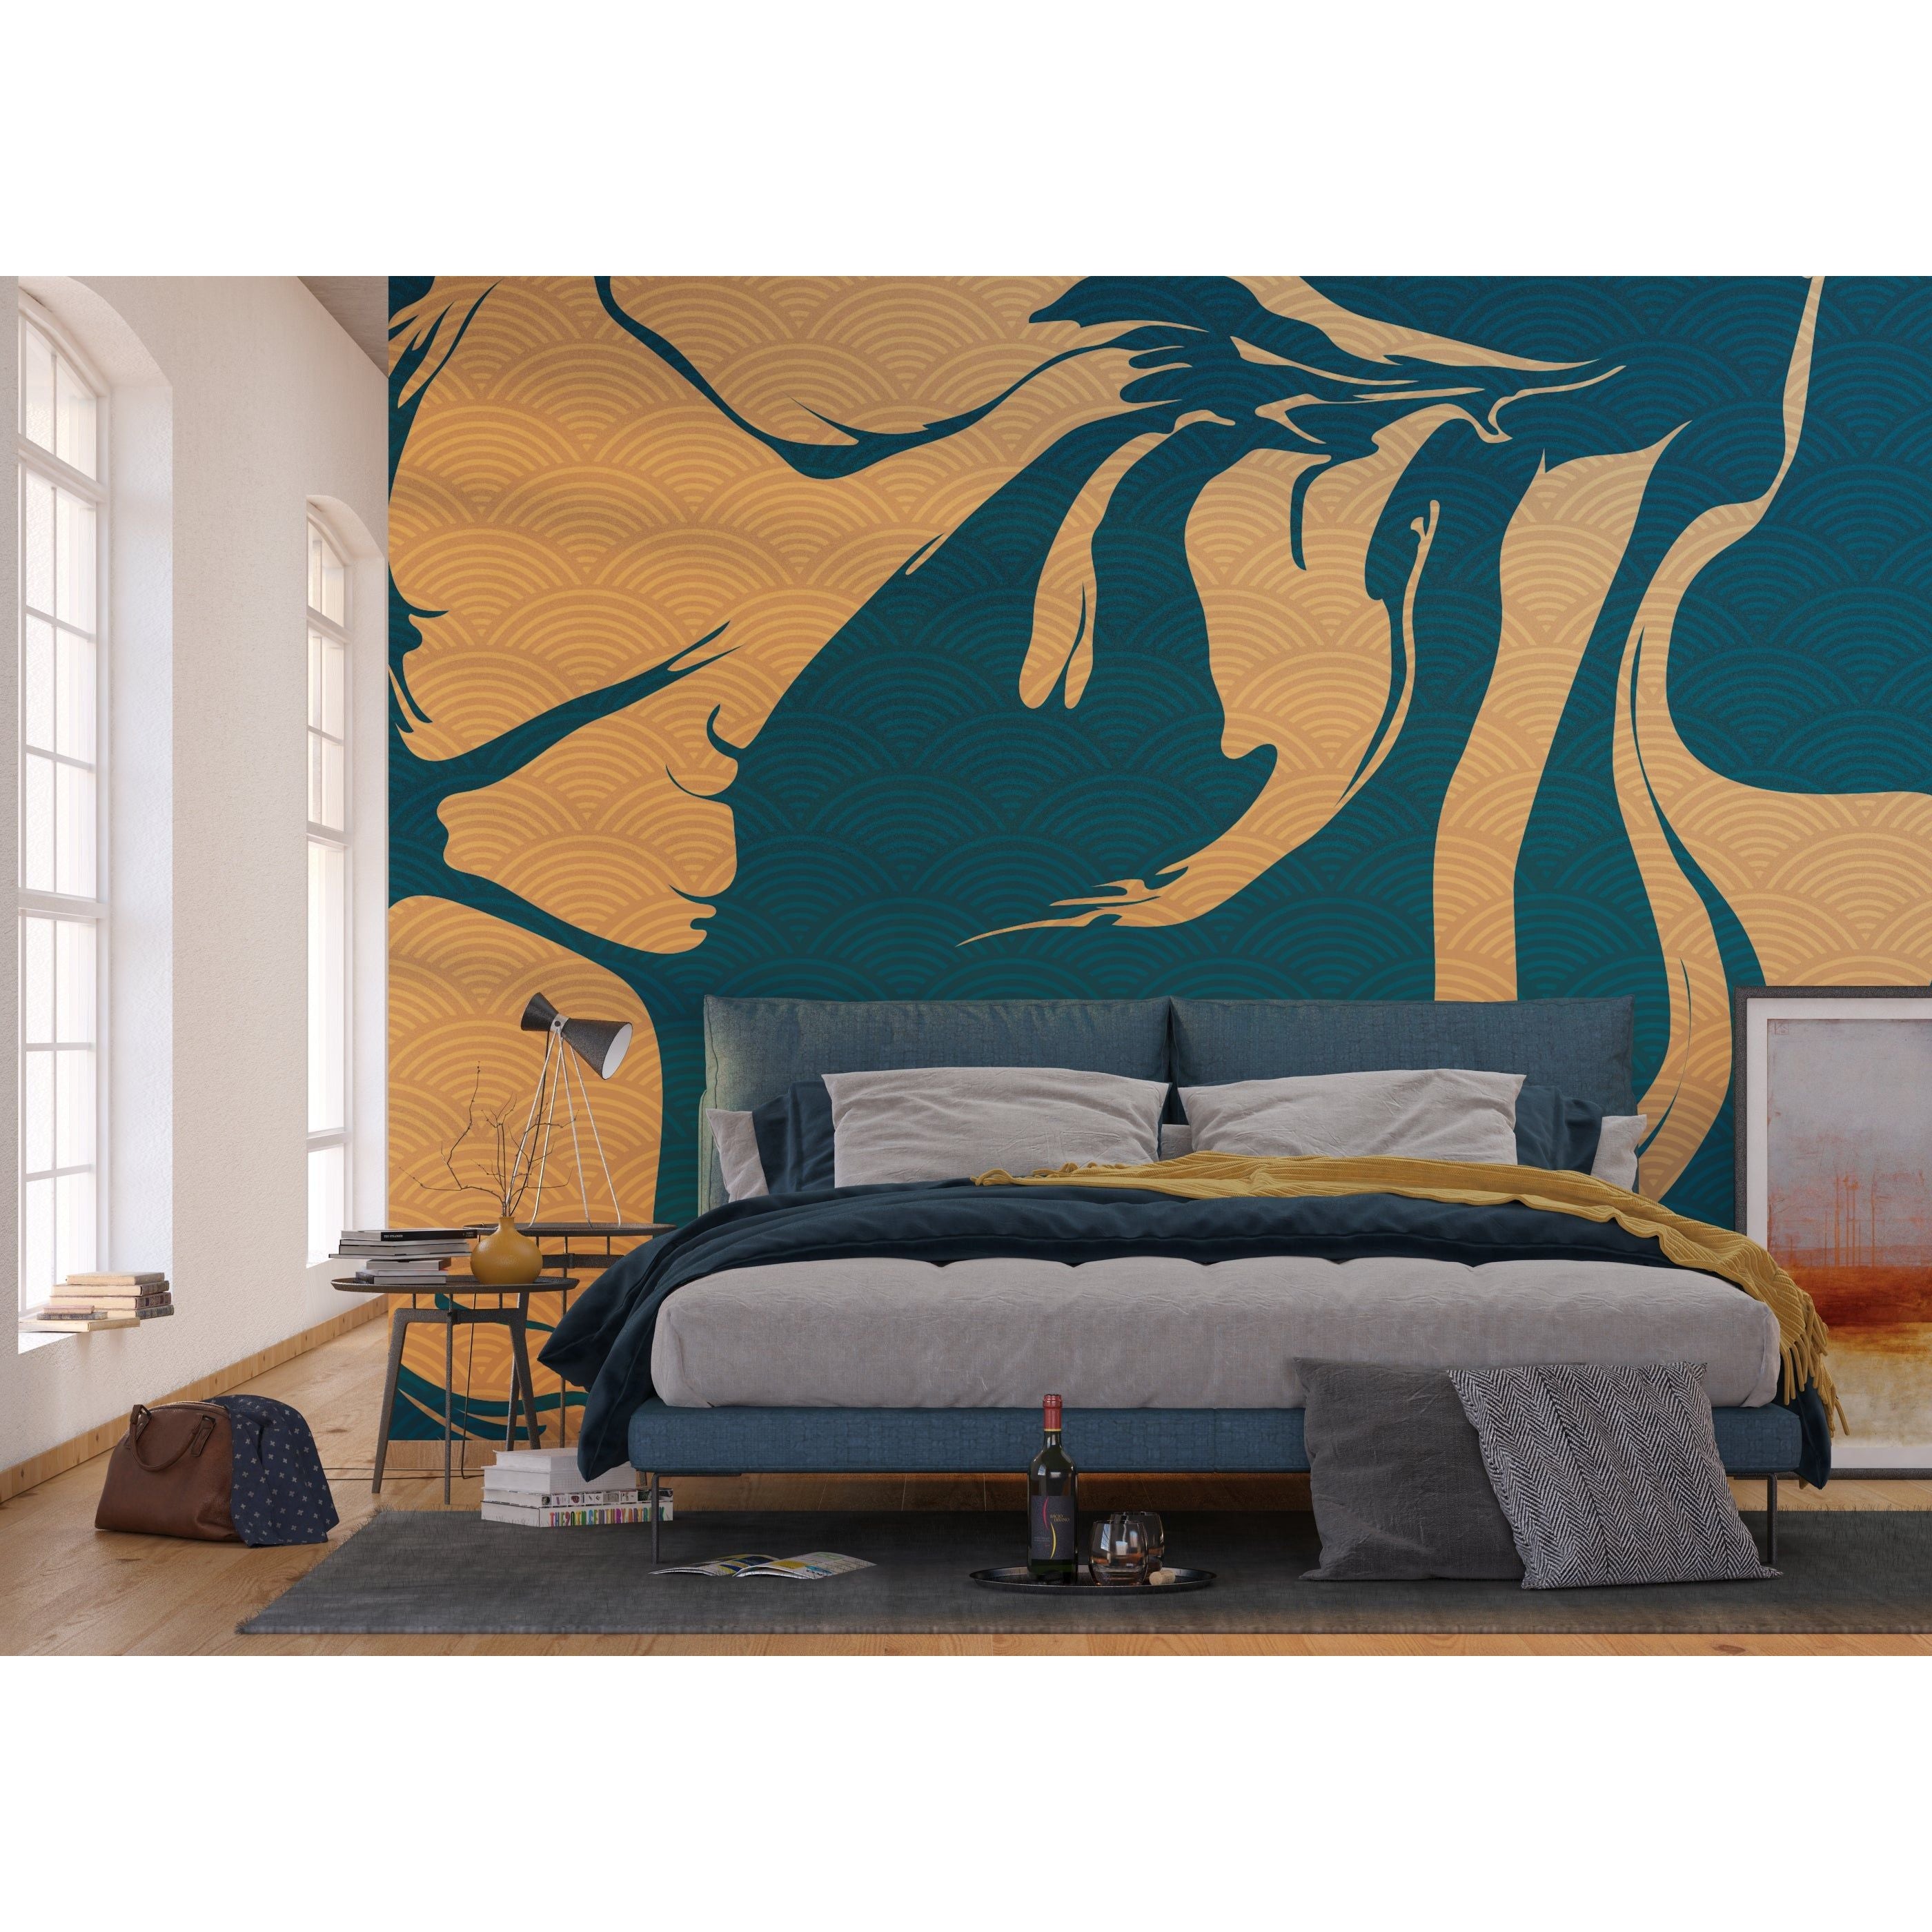 Golden Blue Elegance: Flowing Abstract Wall Mural